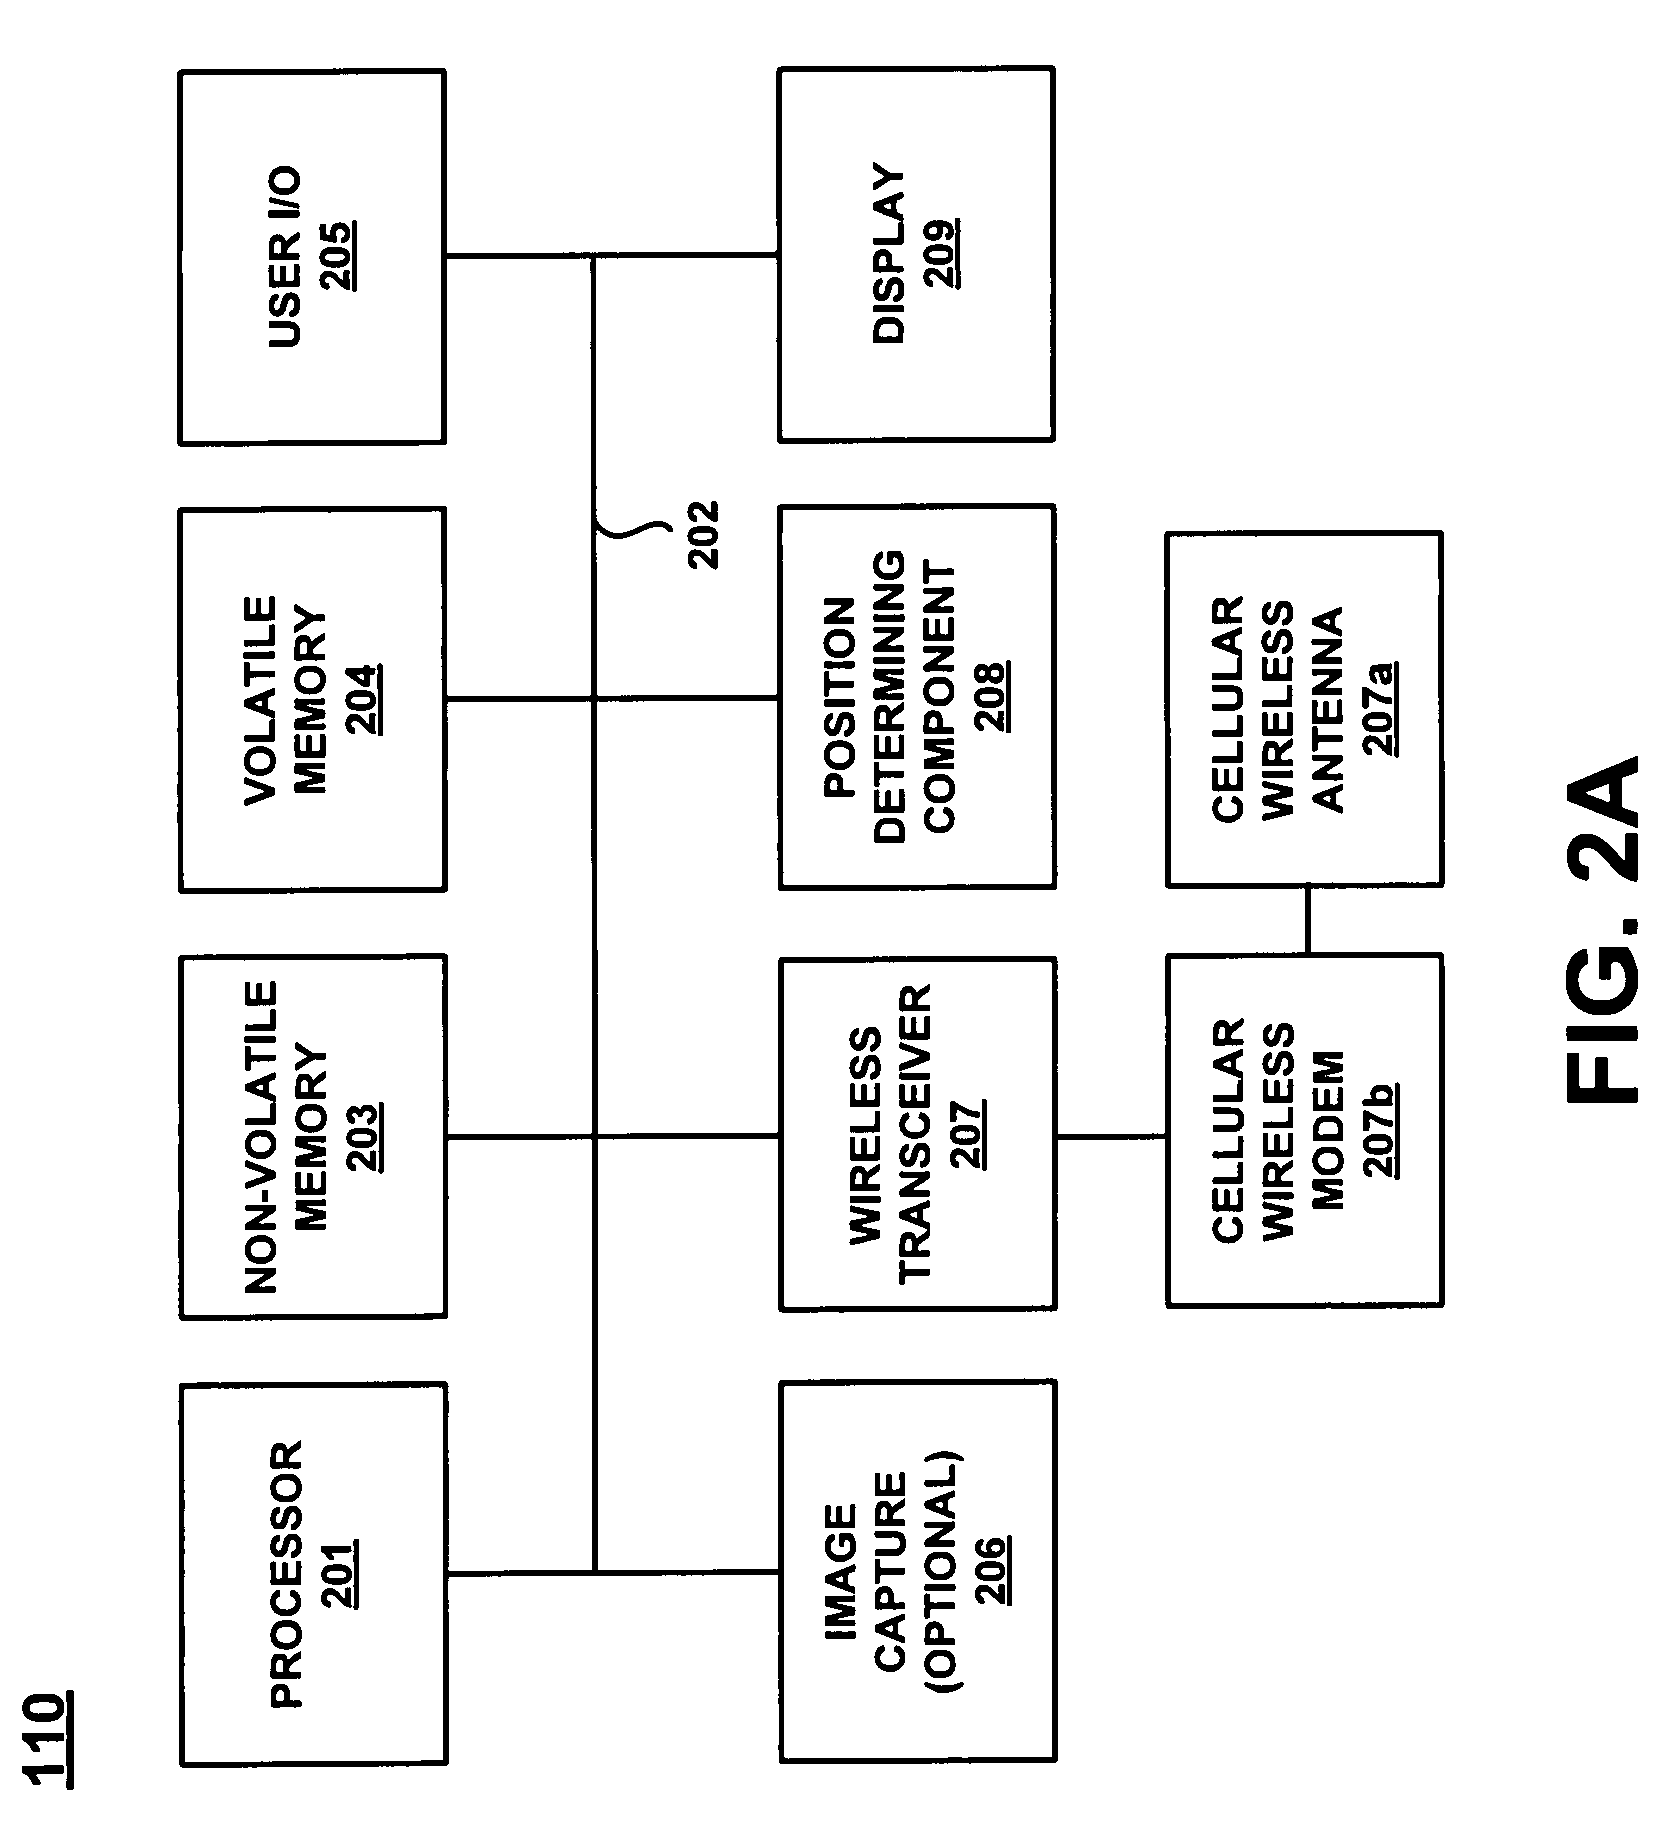 Method and system for implementing a GIS data collection network